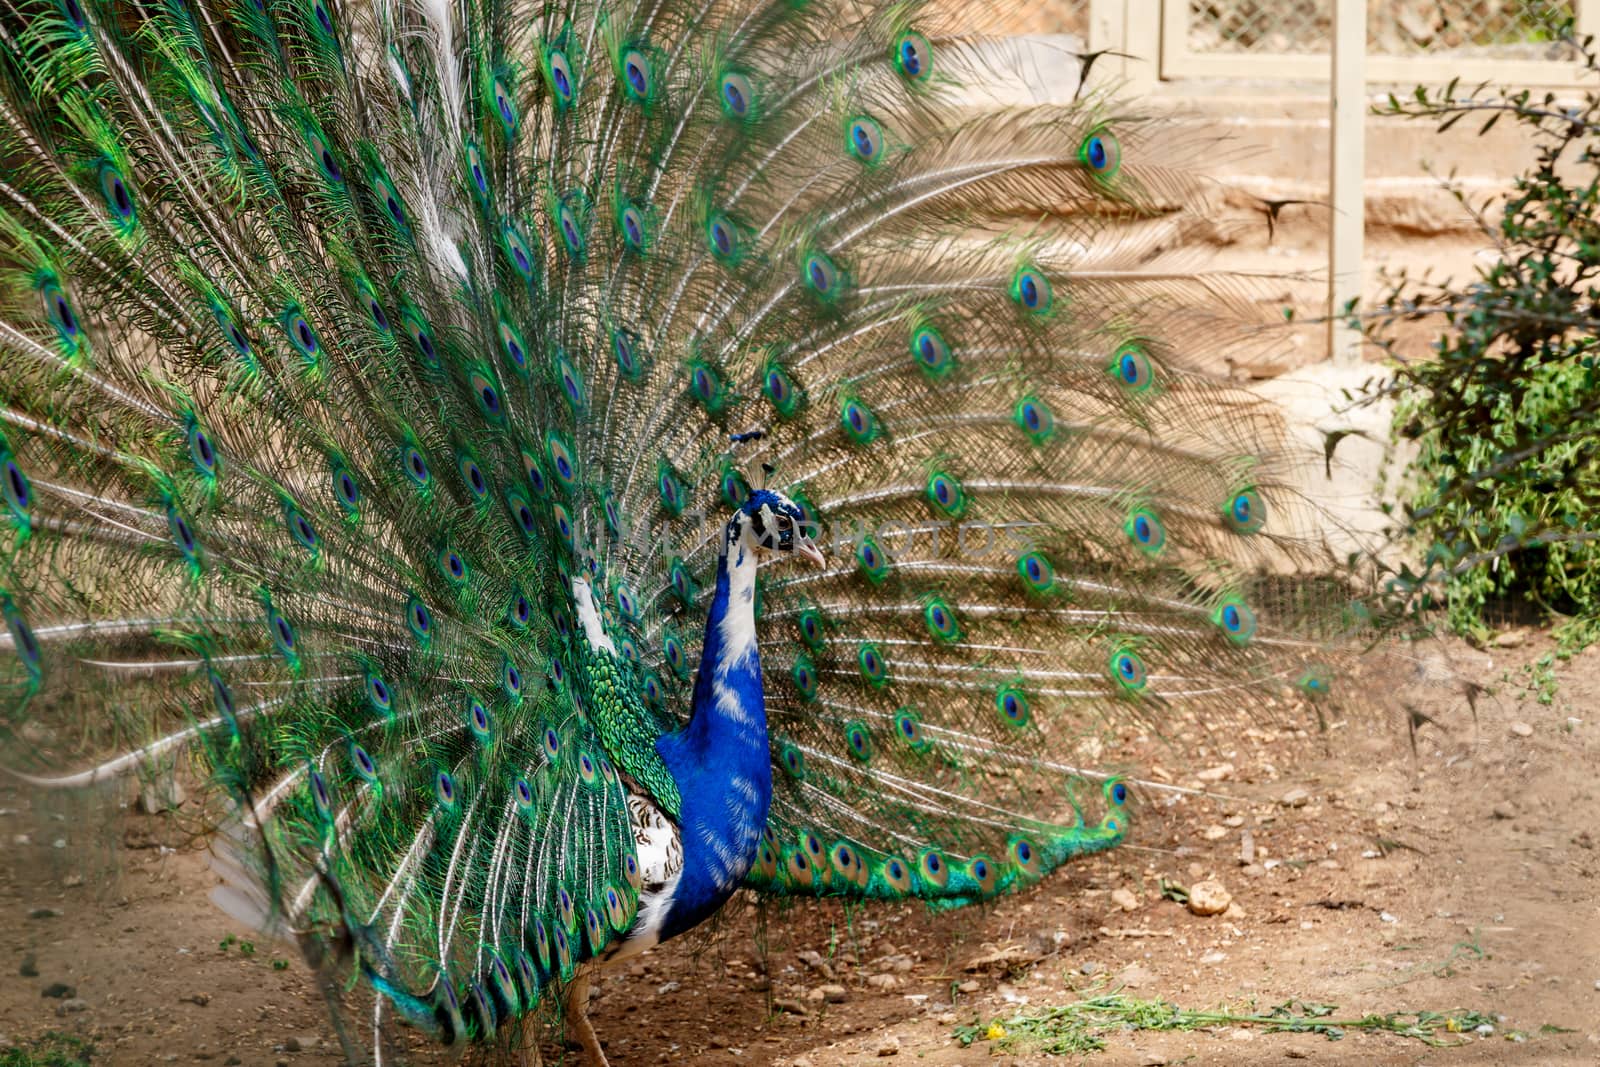 Close up view of blue peacock with colorful feather in a natural park.